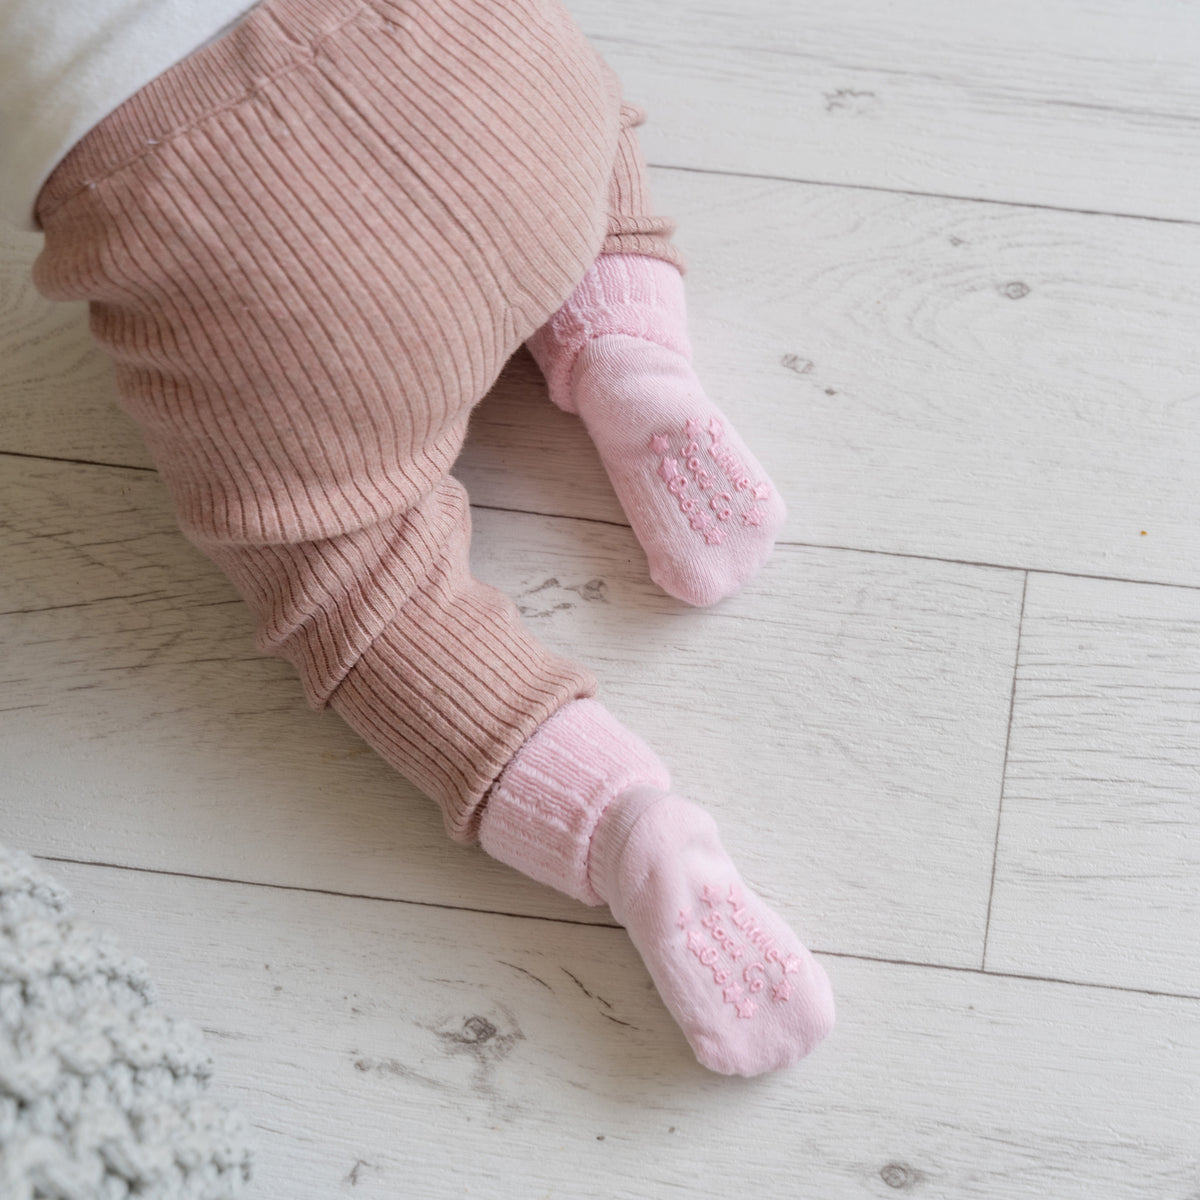 Cosy Stay-on Non-Slip Baby Socks - Pinks 3 pack